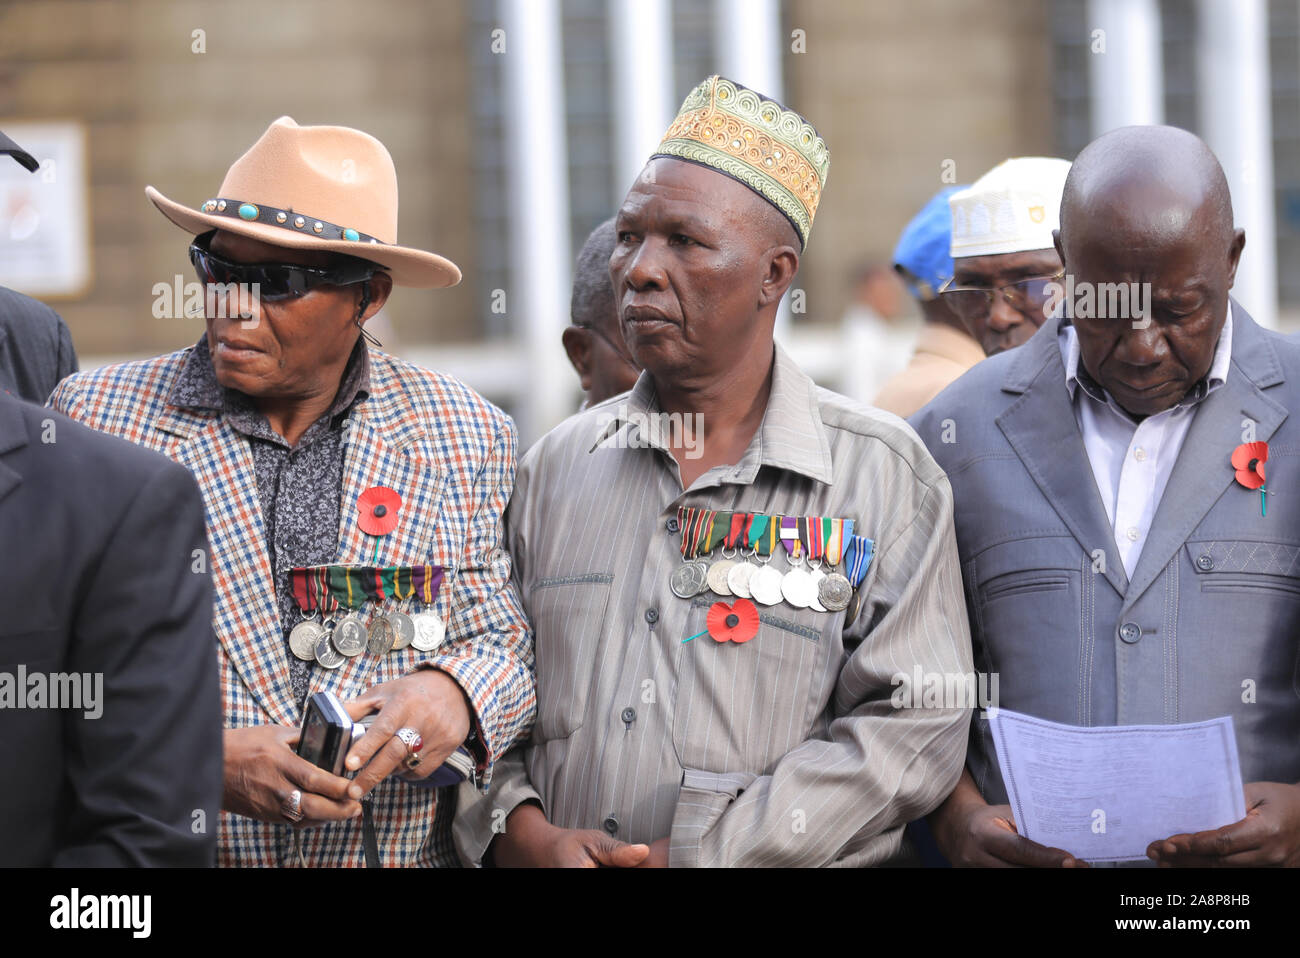 Some of the World War veterans during the commemoration ceremony of World War Veterans held at the Commonwealth War Graves Cemetery that was opened in 1941 by the military authorities. It contains 1,952 Commonwealth burials of the Second World War, 11 of which are unidentified. Nairobi was the headquarters of the East African Force. Stock Photo